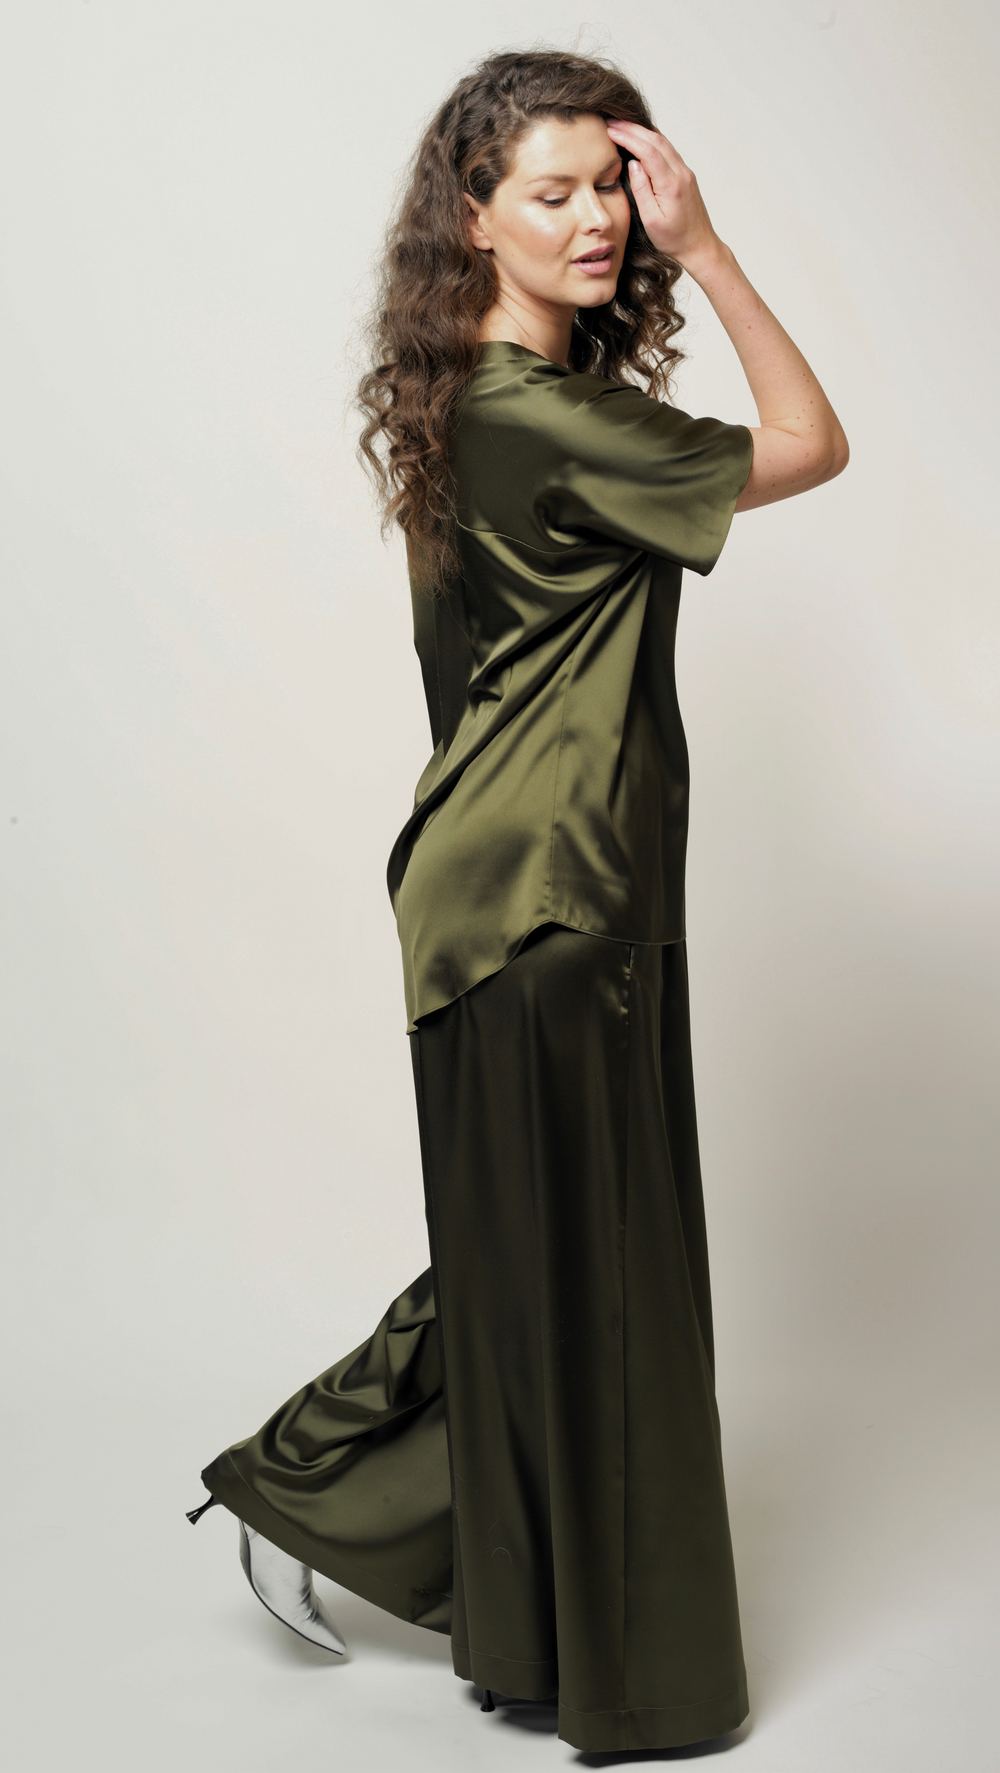 Forest green silk top BeaA - Be At Home with Yourself